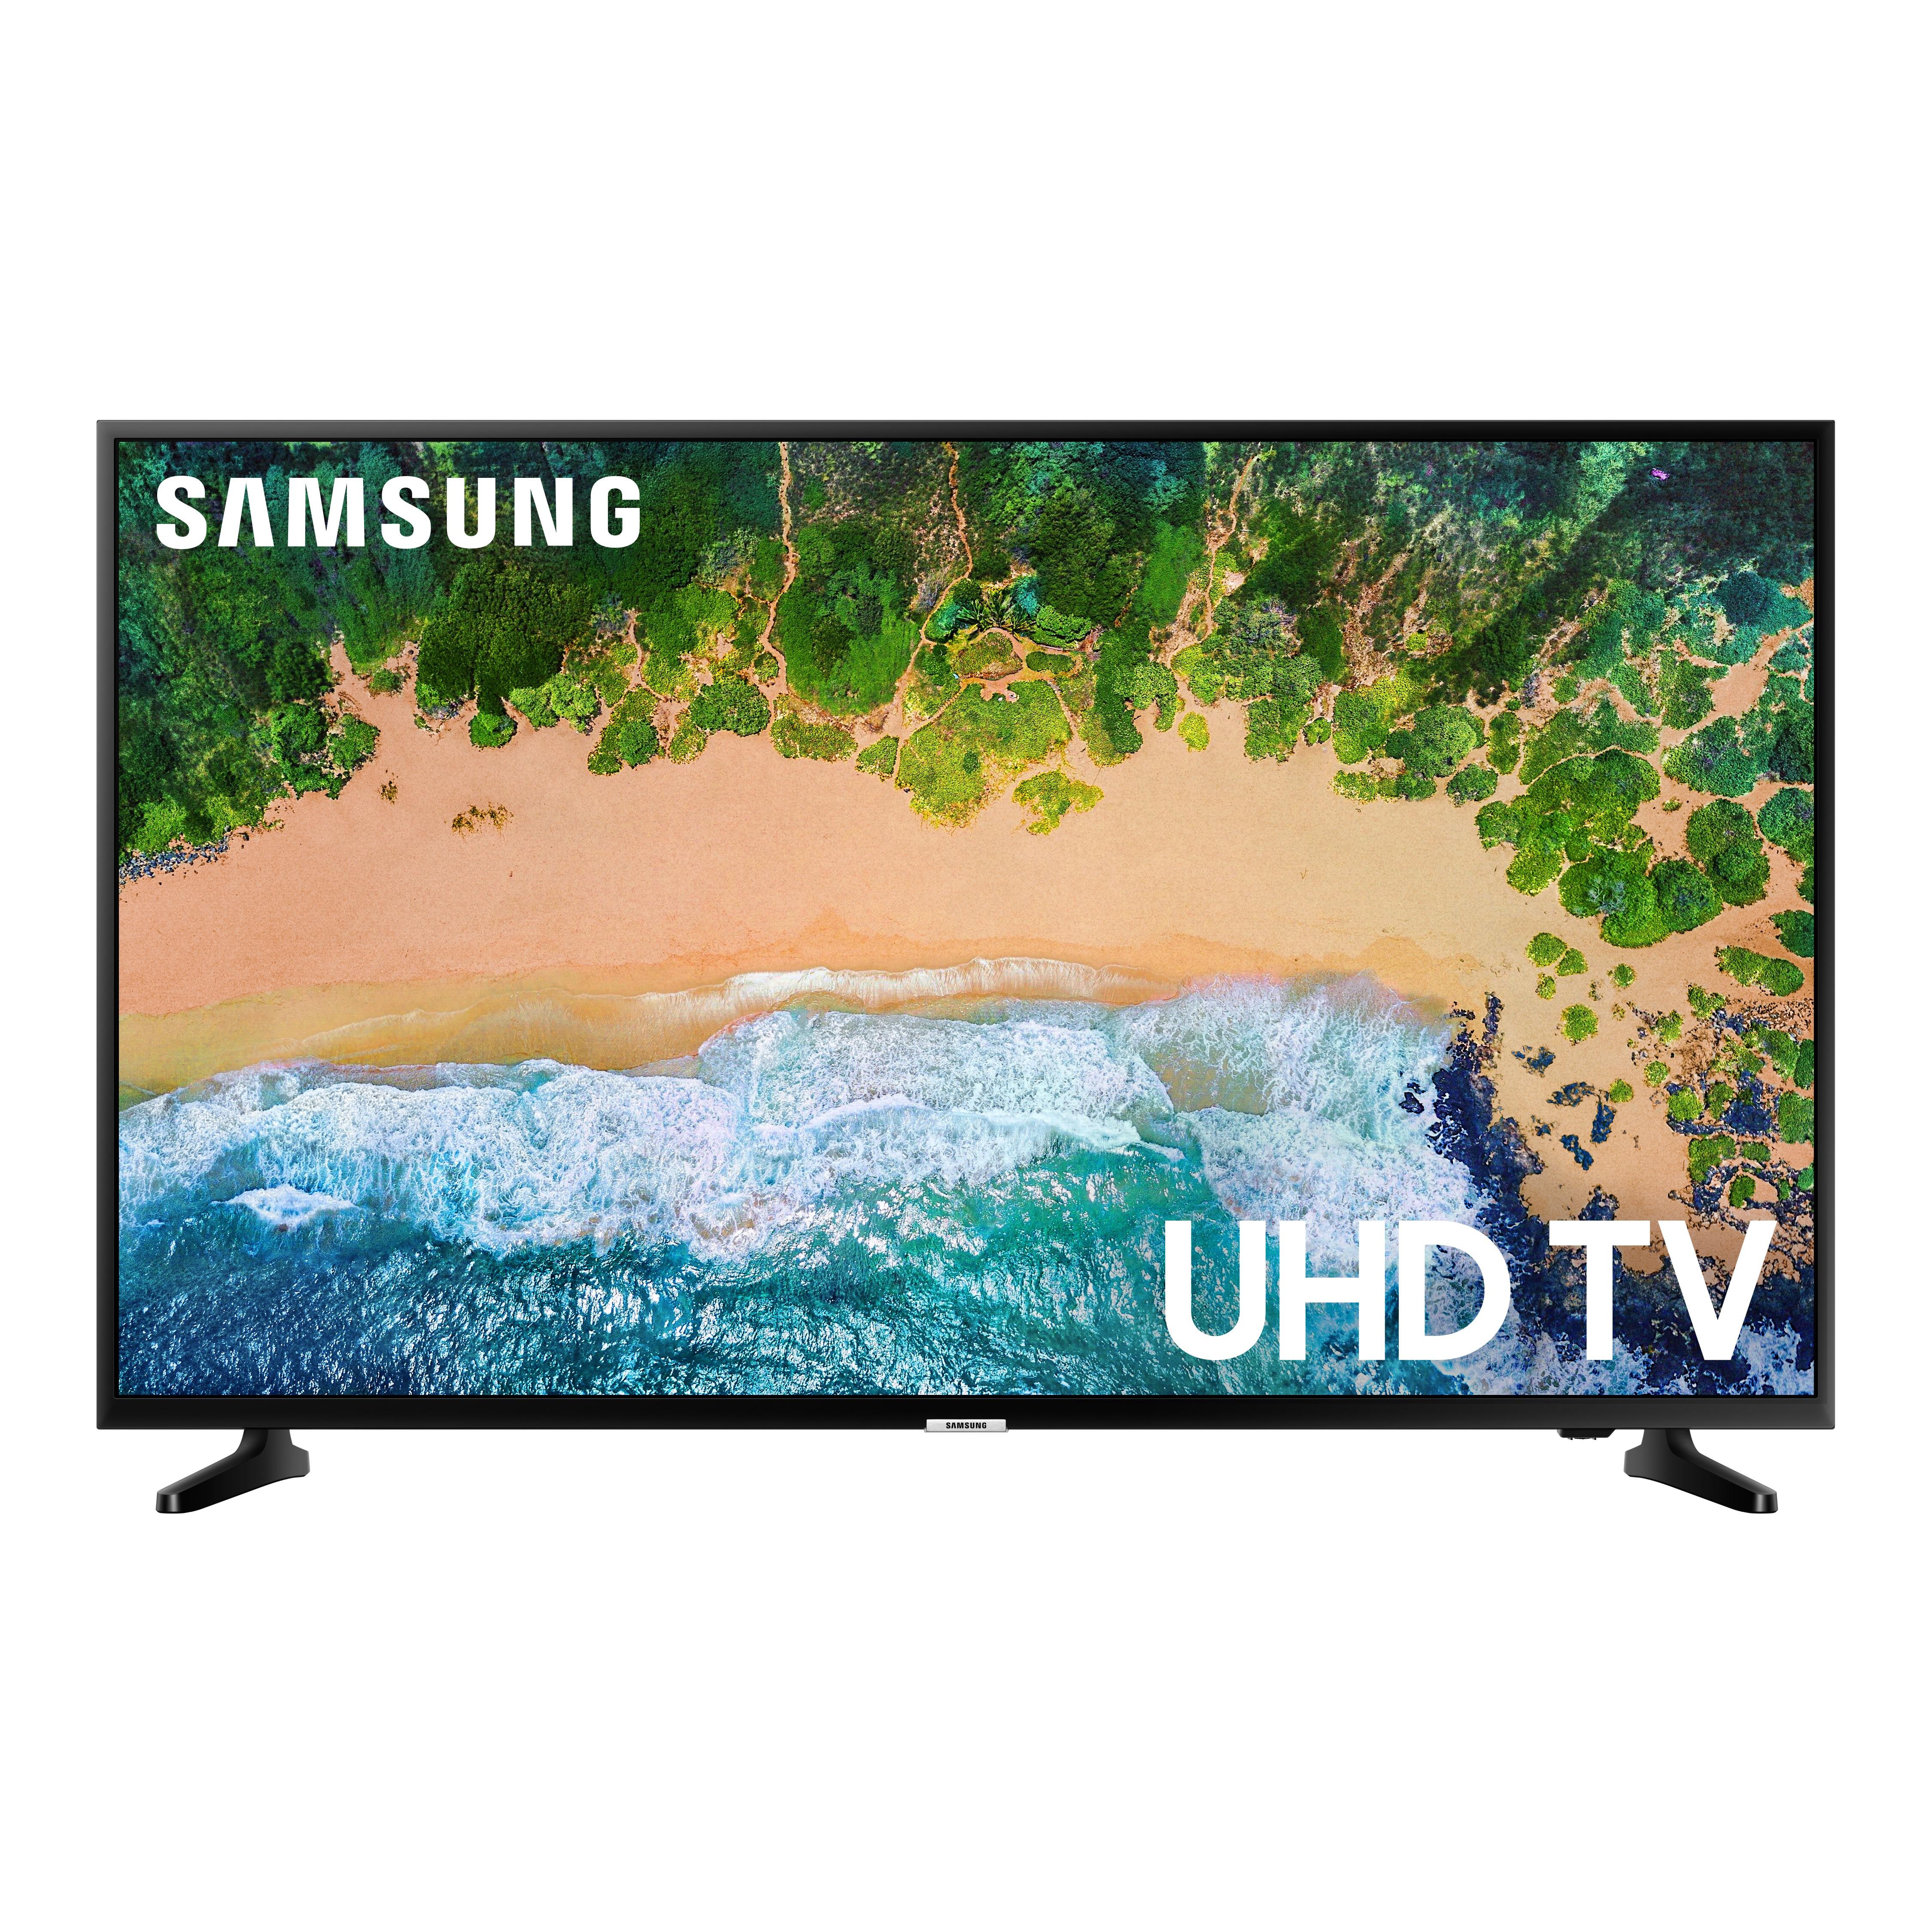 SAMSUNG 65" Class 4K UHD 2160p LED Smart TV with HDR UN65NU6900 - image 16 of 20